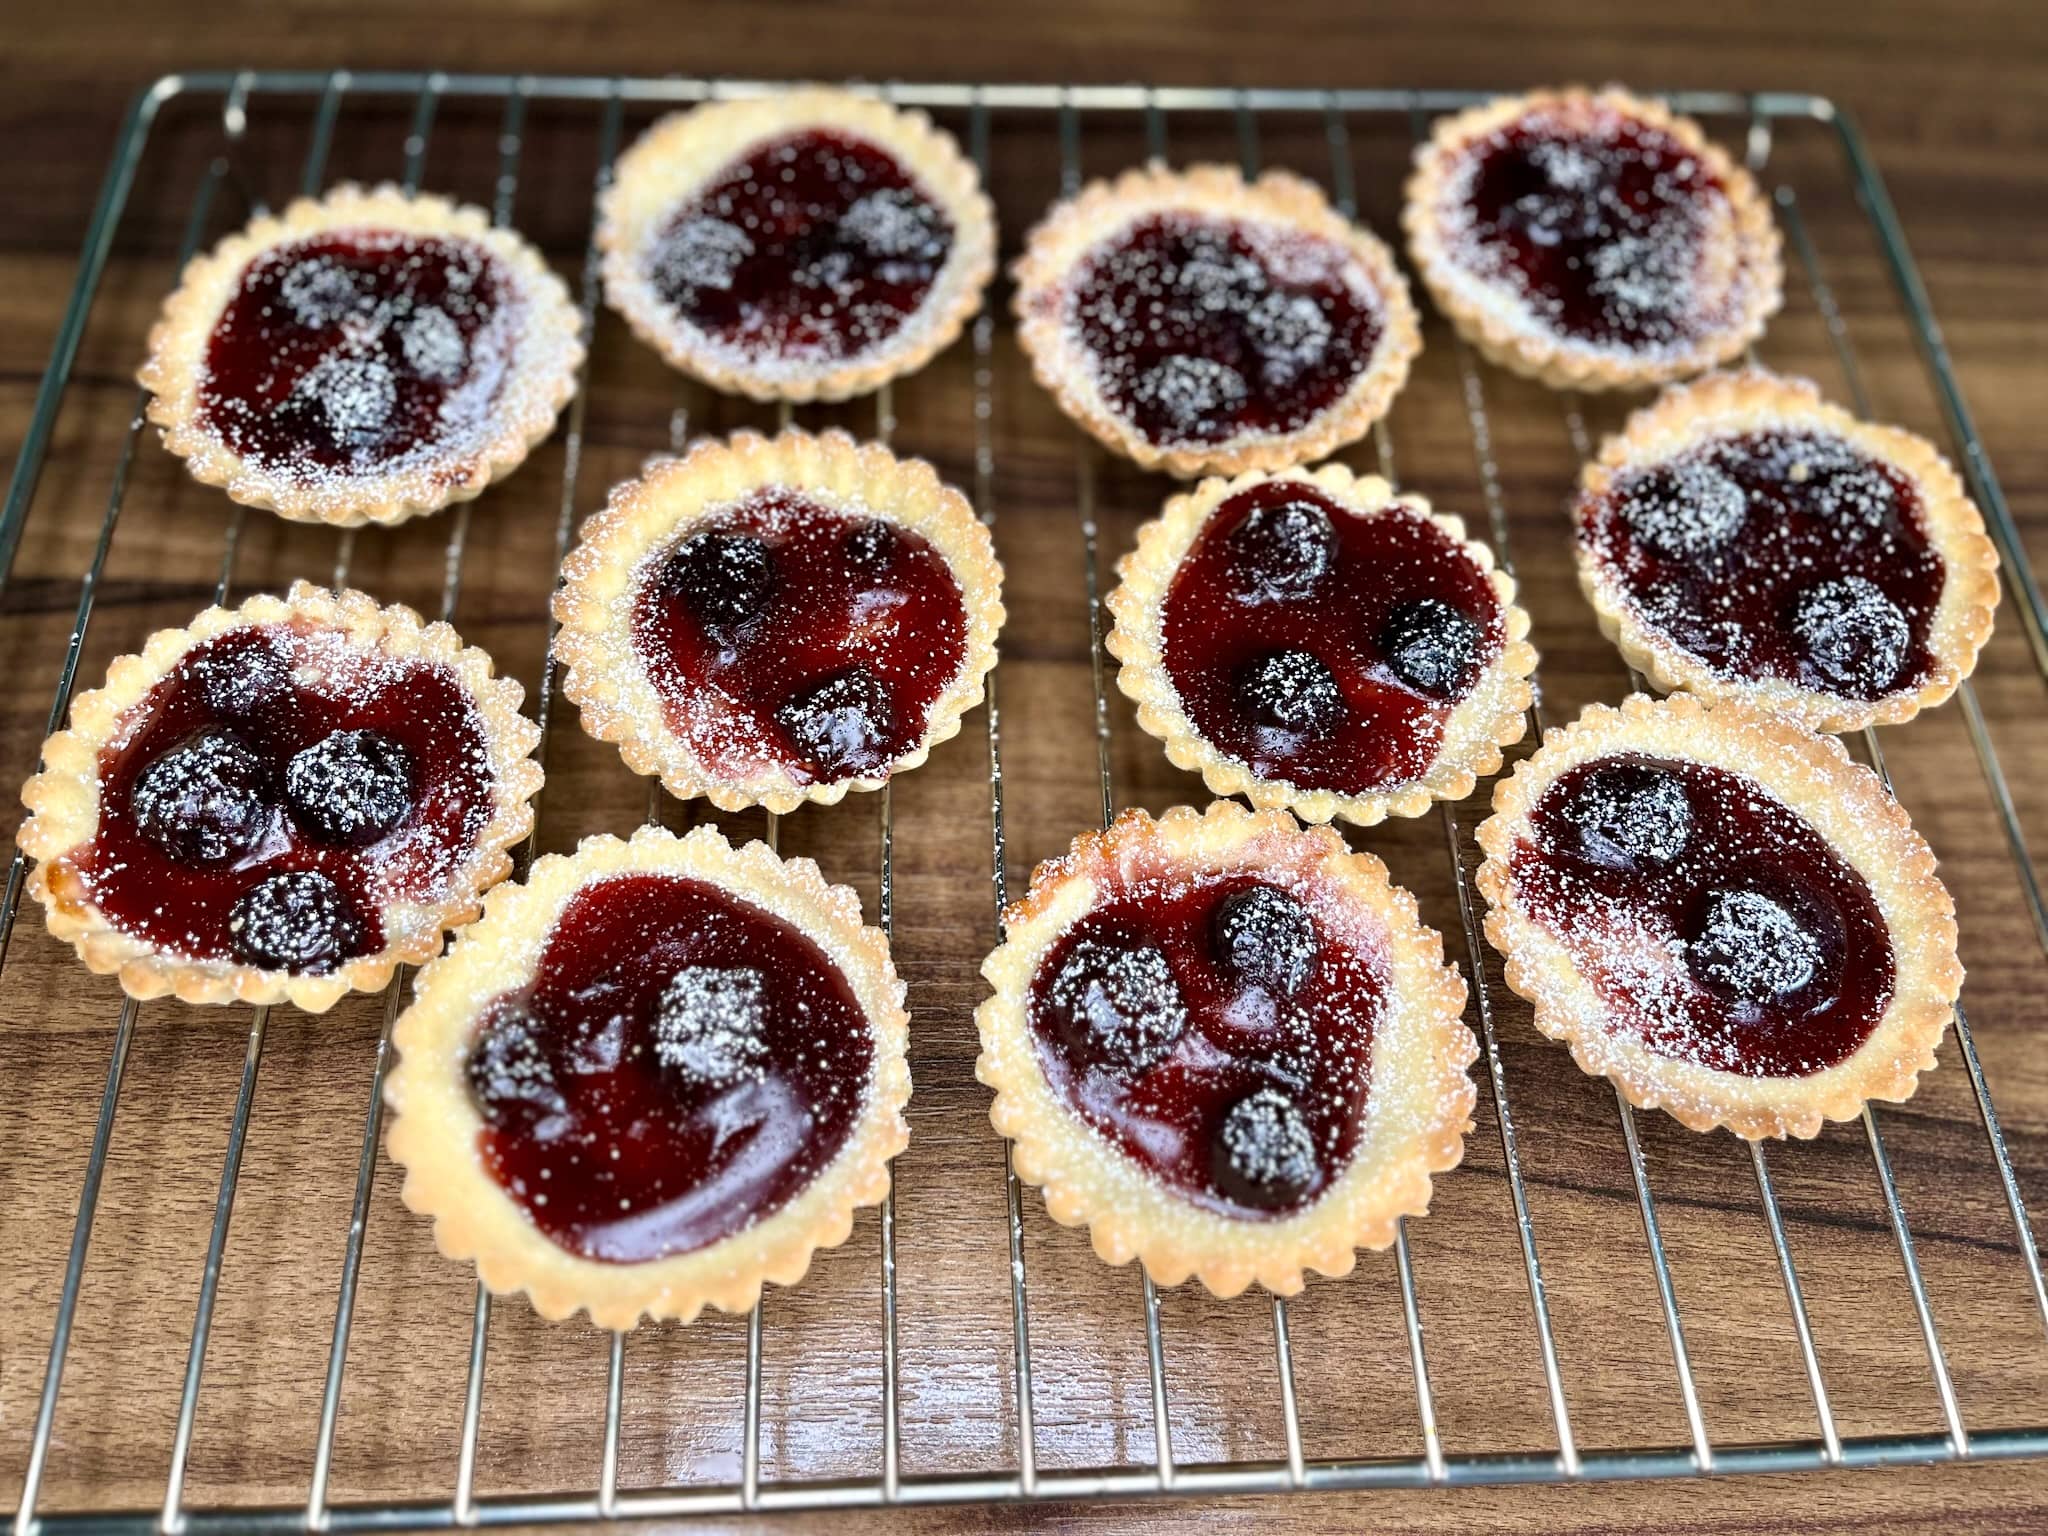 Mini Cherry Tarts, cooled and dusted with icing sugar, are ready to serve